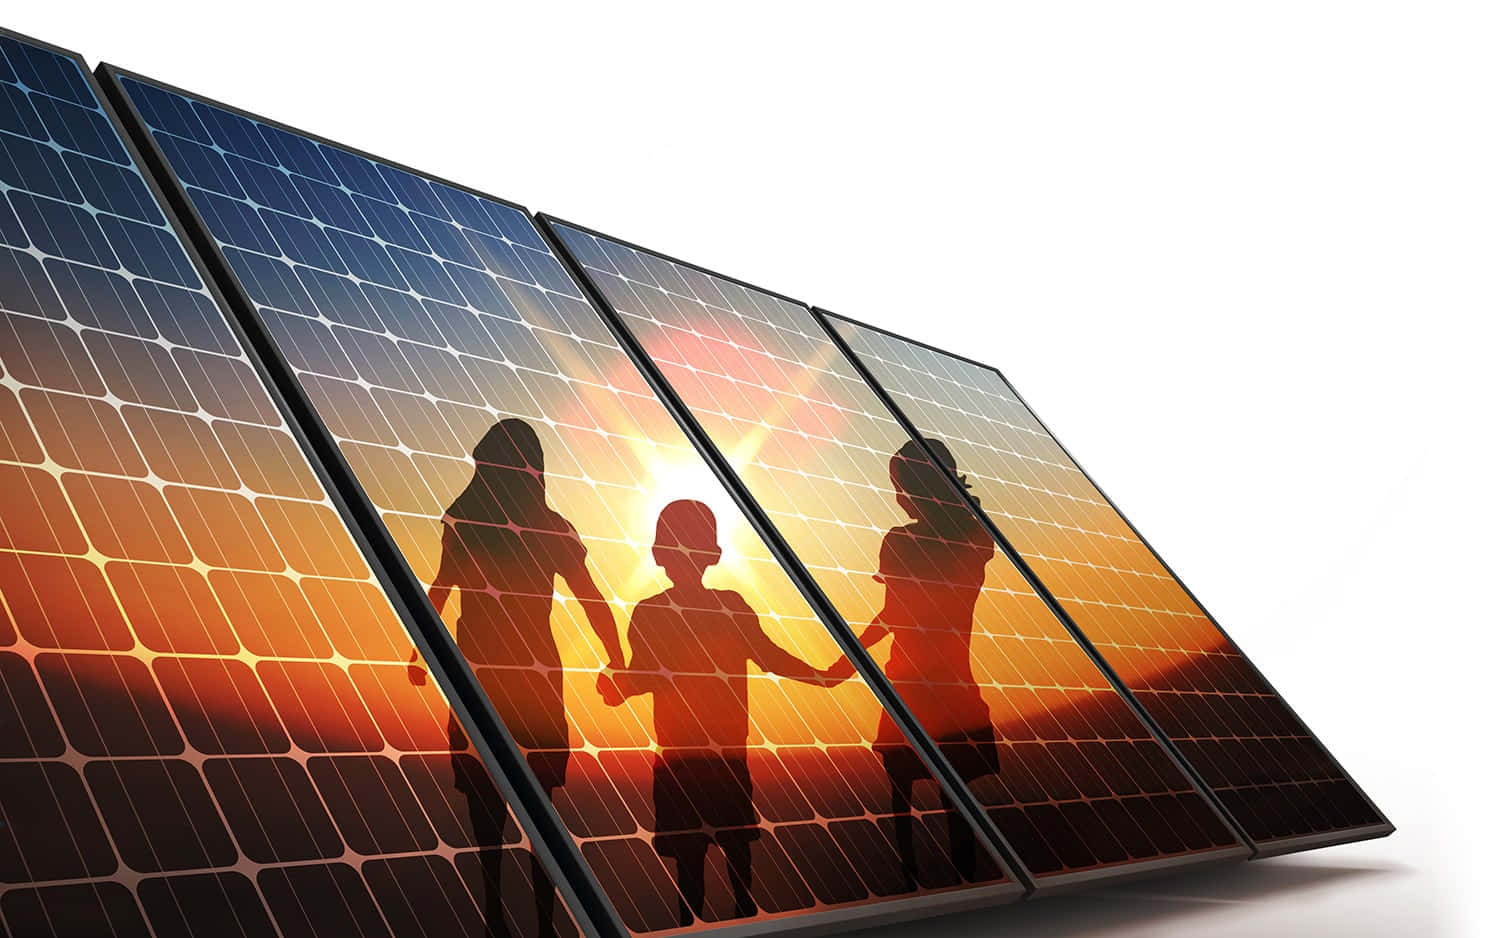 Solar Panel With Kids Silhouette During Sunset Wallpaper